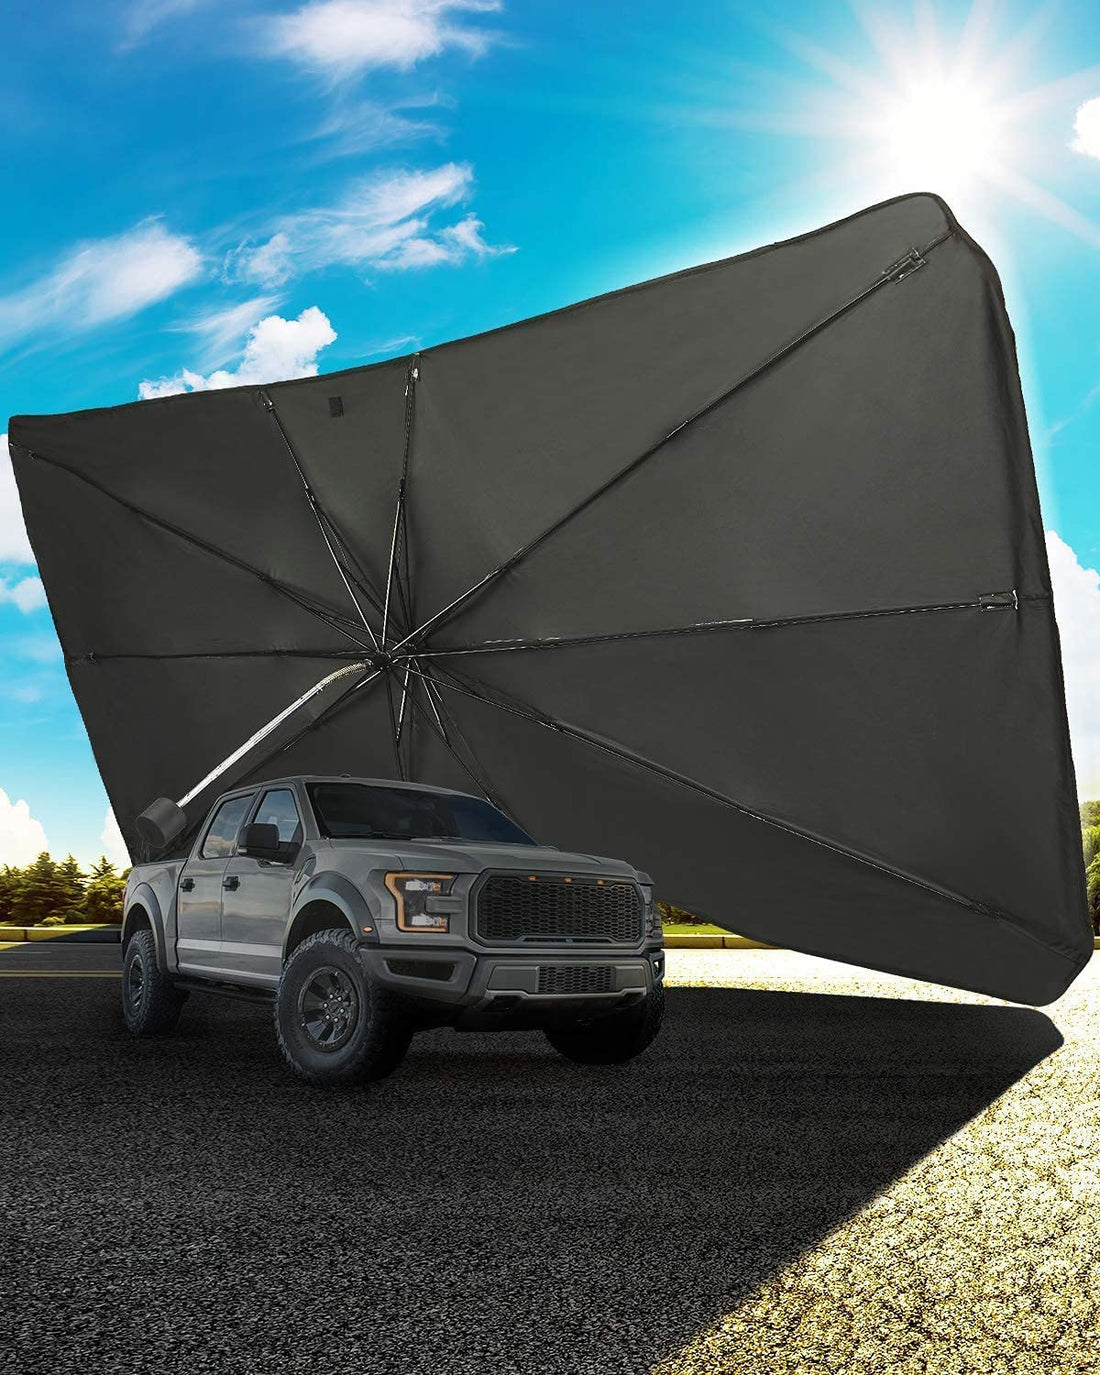 Windshield Sun Shade Umbrella Compatible with F150, for Full-Size Pickup Truck, 360° Rotation Bendable Shaft Foldable(61''x 30'')